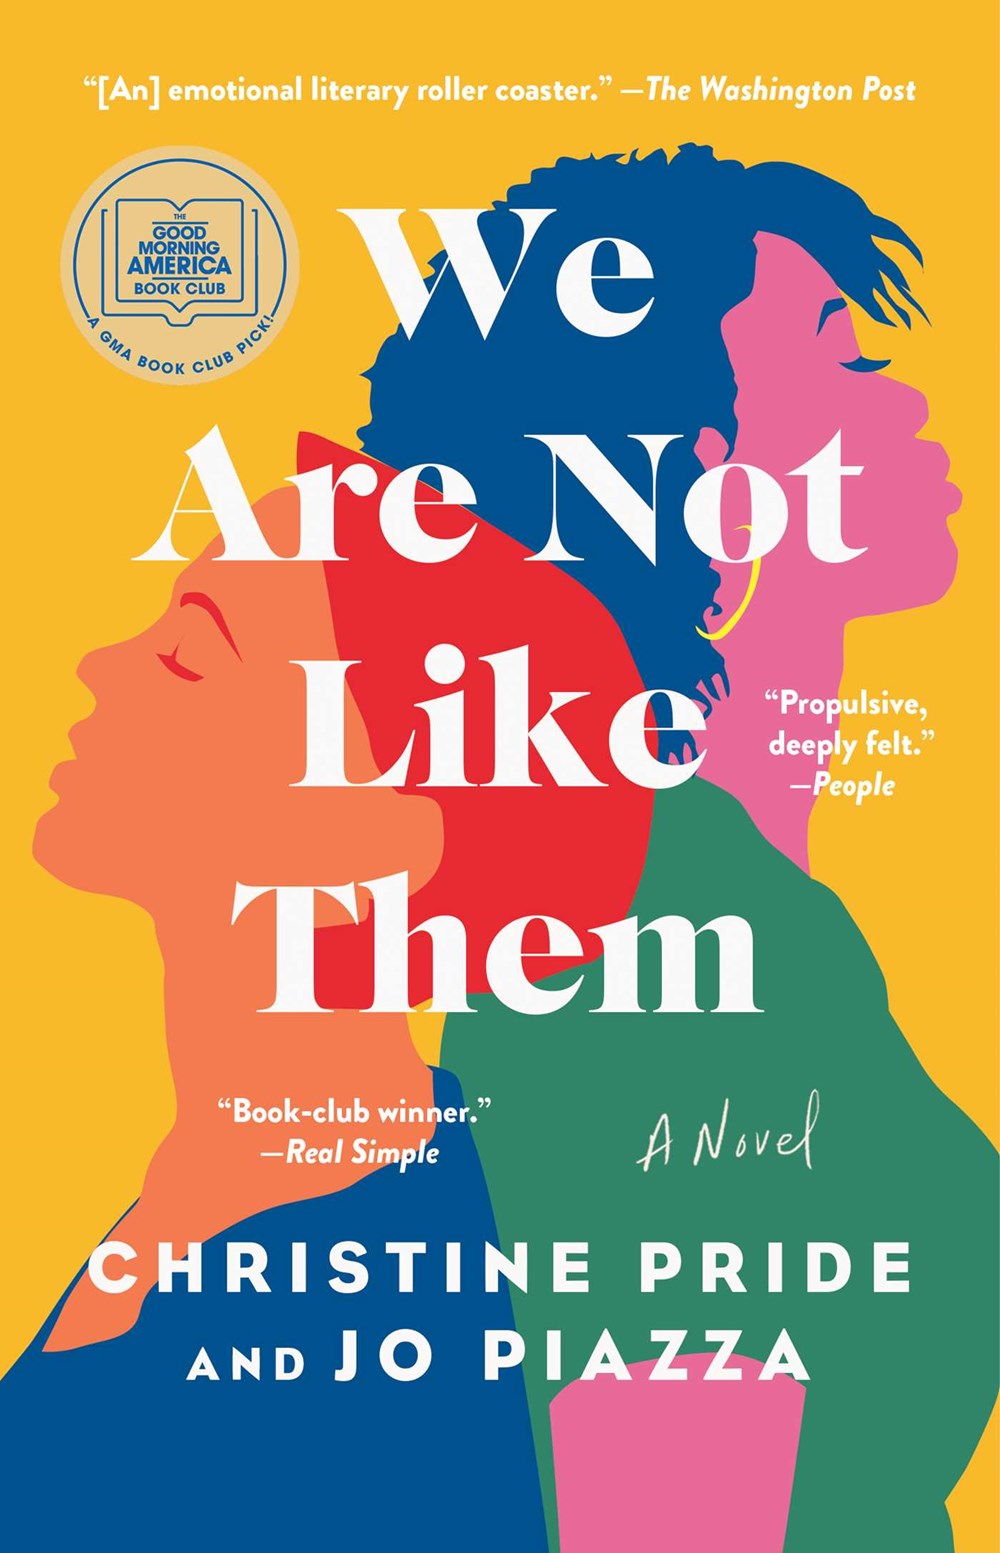 We Are Not Like Them : A Novel